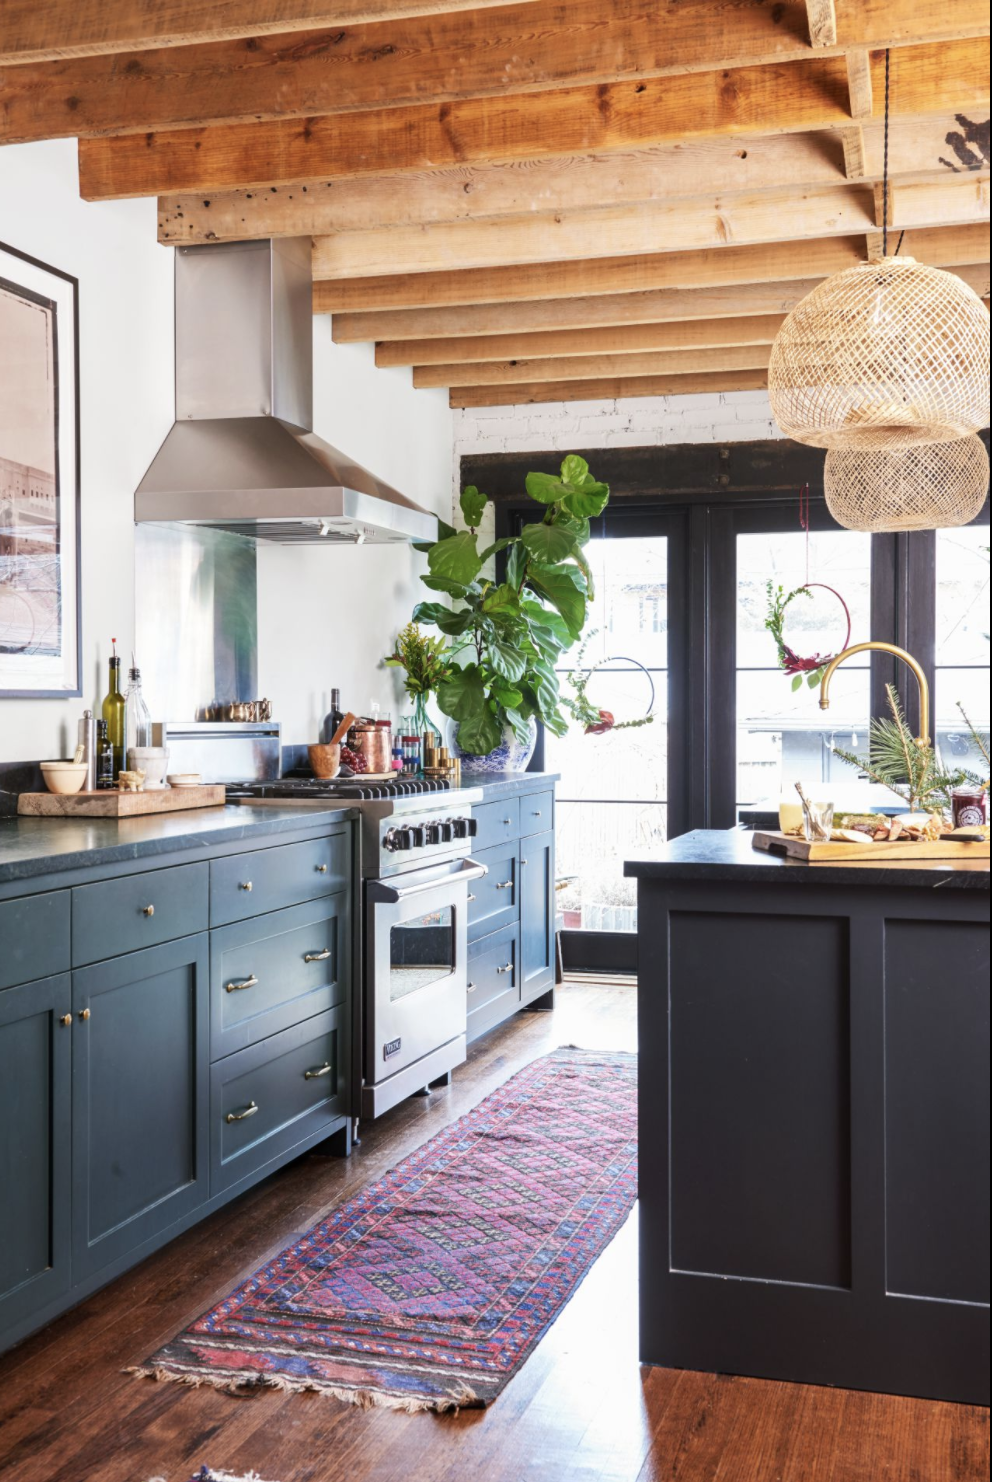 https://hips.hearstapps.com/hmg-prod/images/french-country-kitchen-ideas-sian-richards-1649037268.png